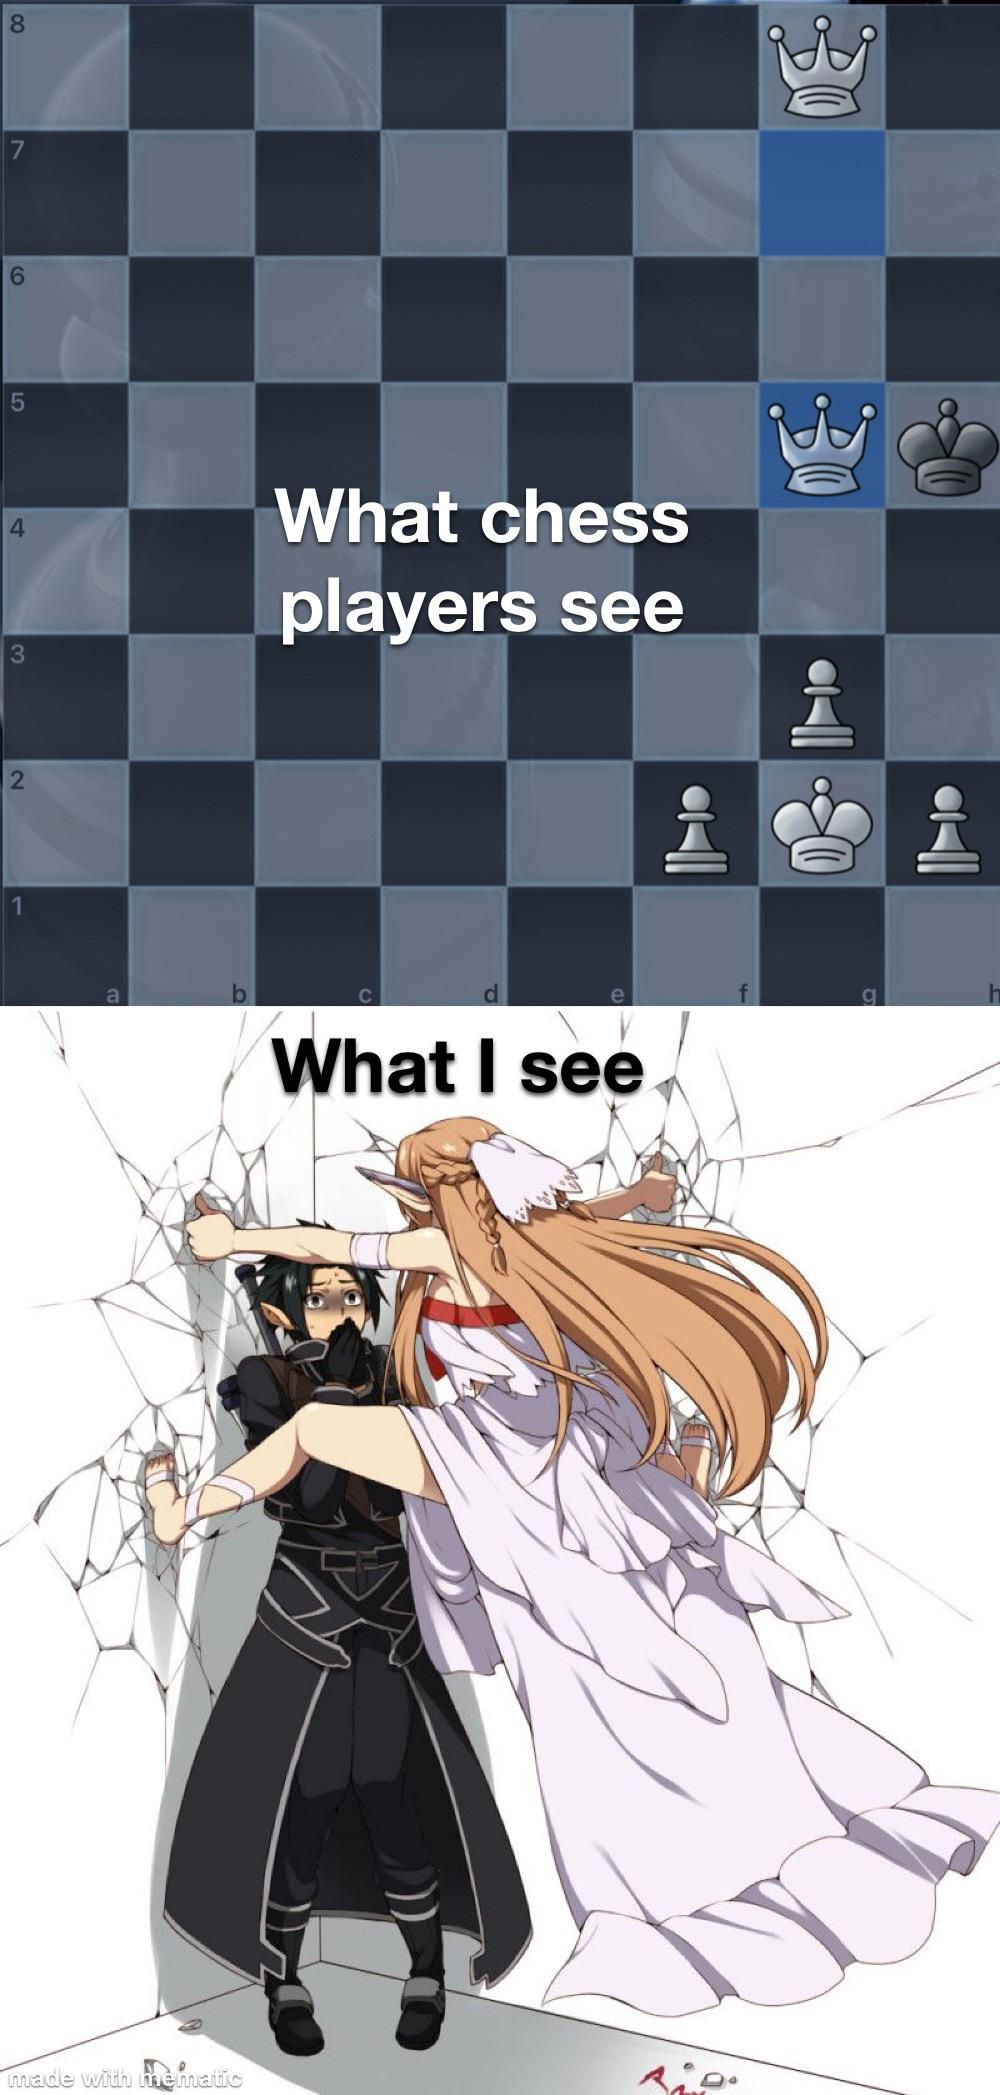 About to be banned from chess brb